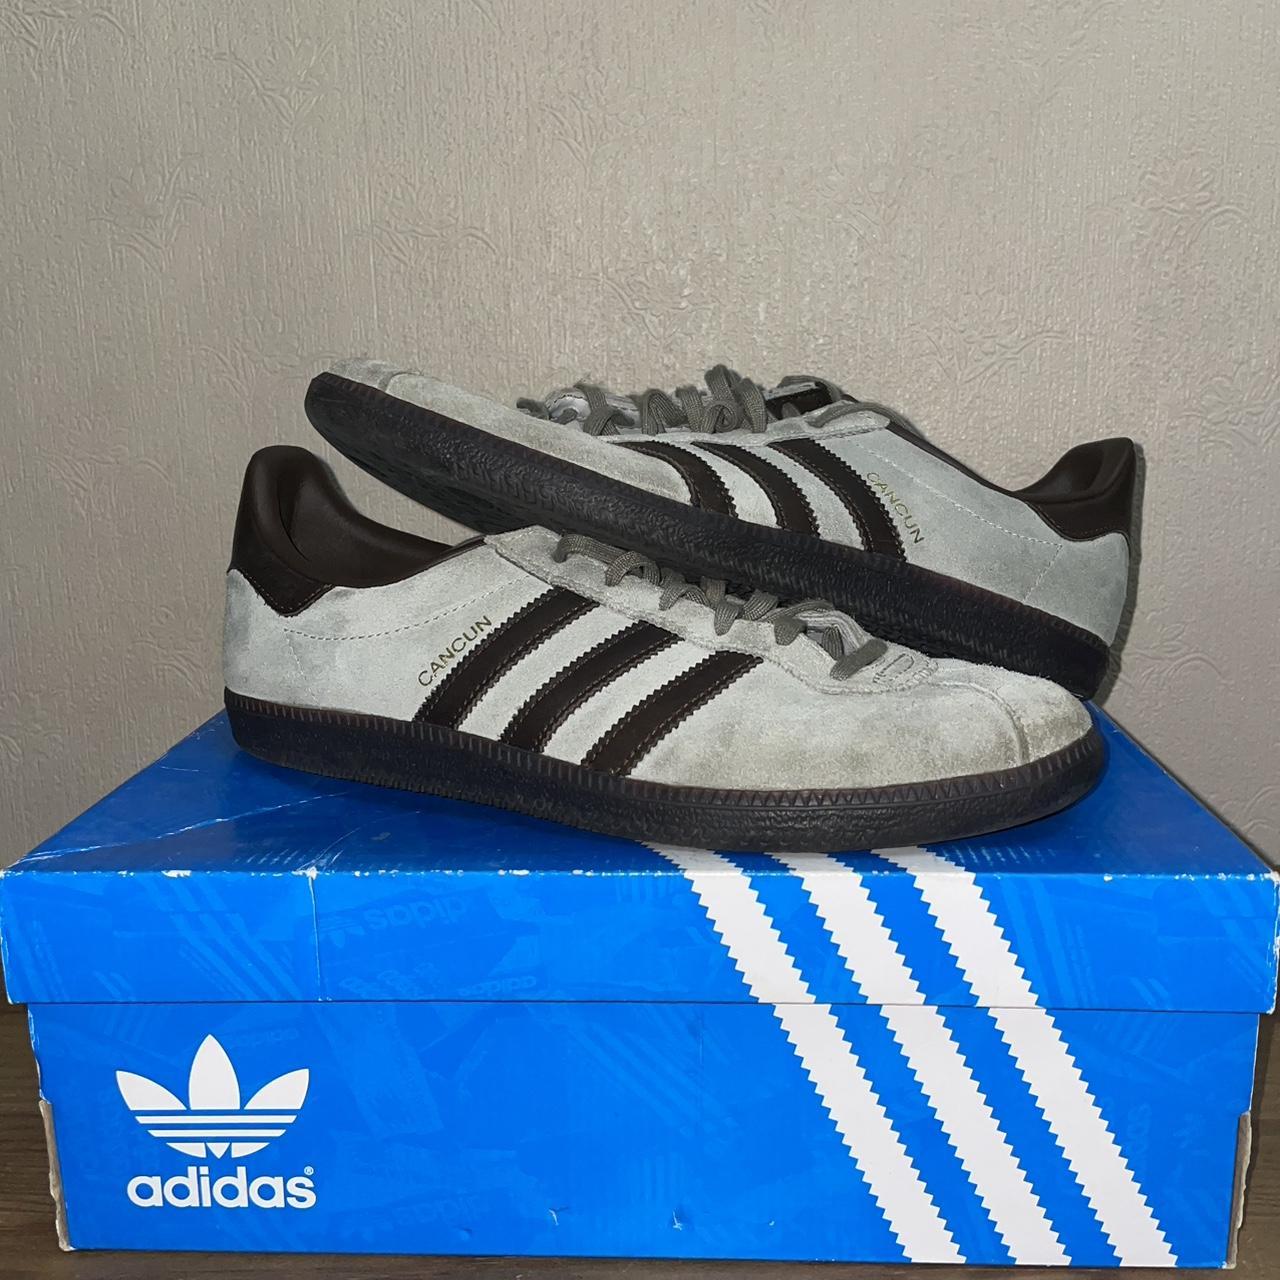 Adidas Cancun (Island Series) Size 8 Perfect for the... - Depop